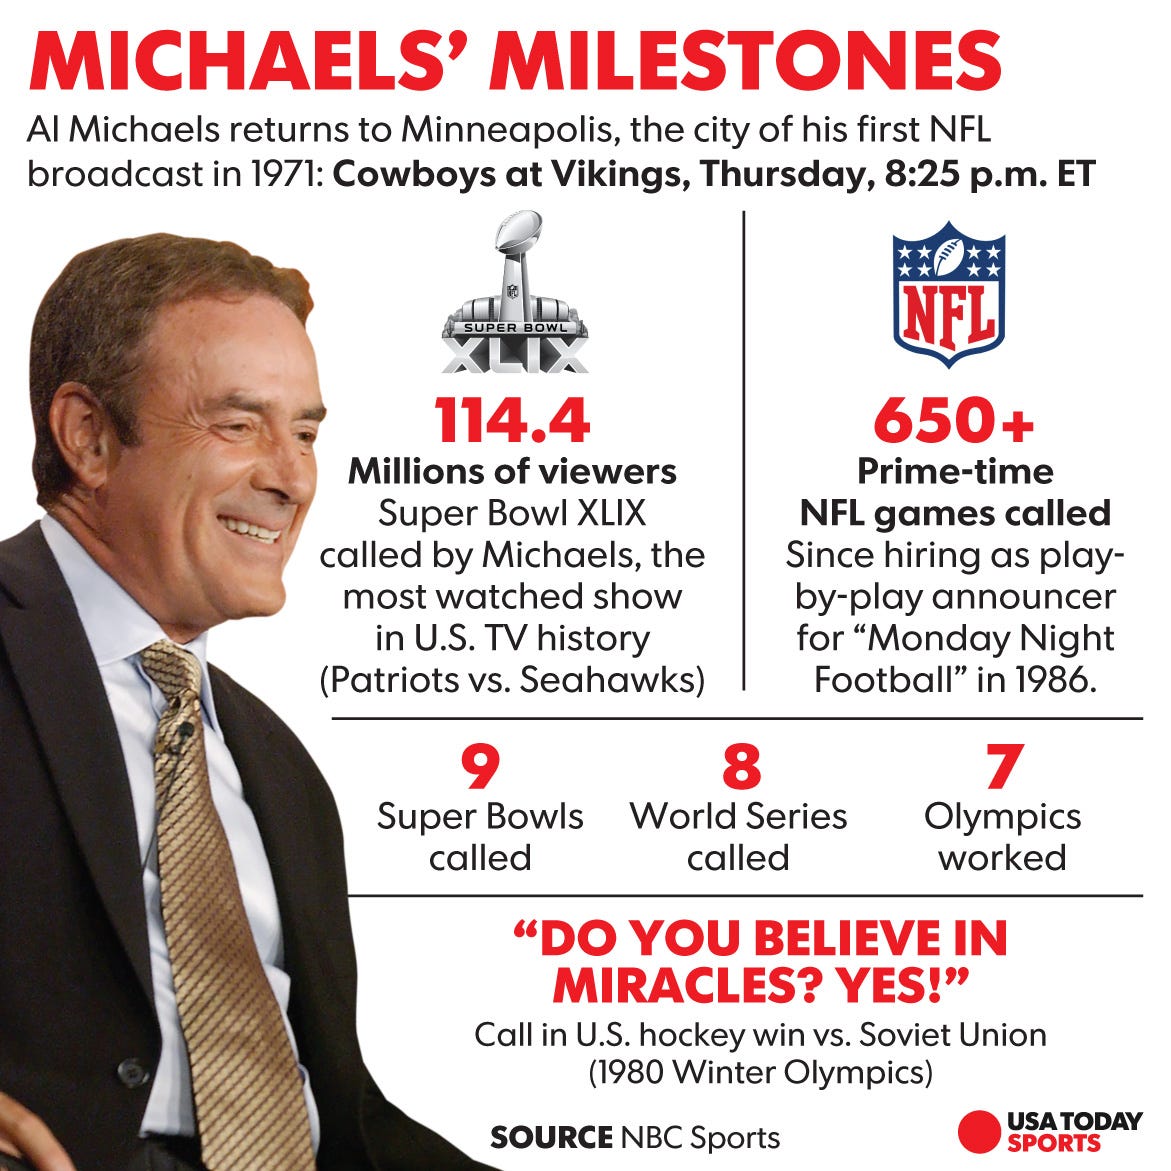 Minnesota came before 'Miracle' for Al Michaels